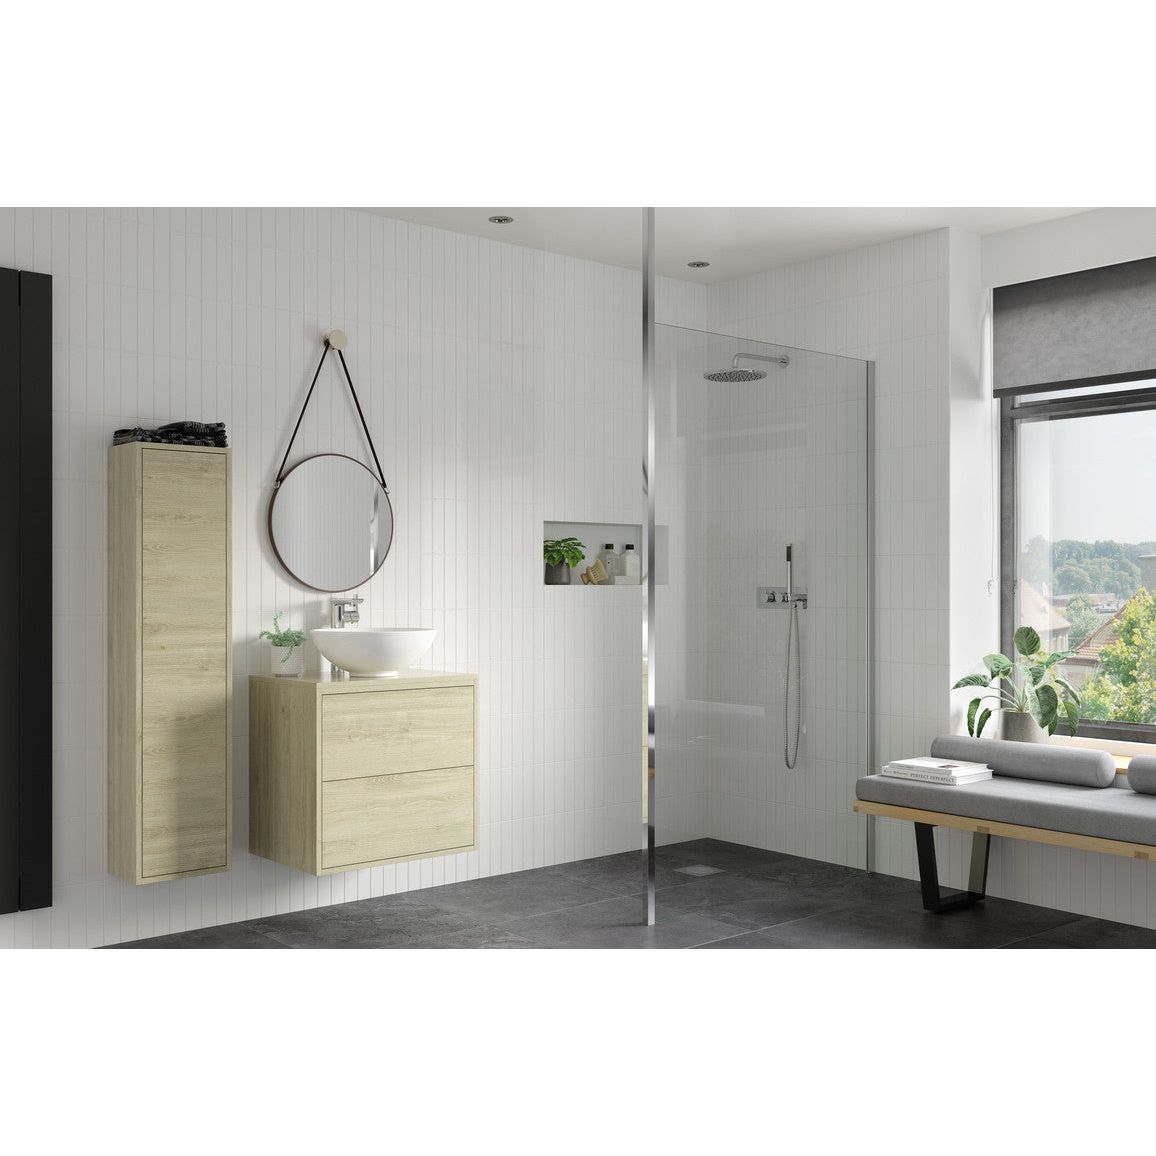 Montague 700mm Wetroom Panel & Floor-to-Ceiling Pole - Chrome